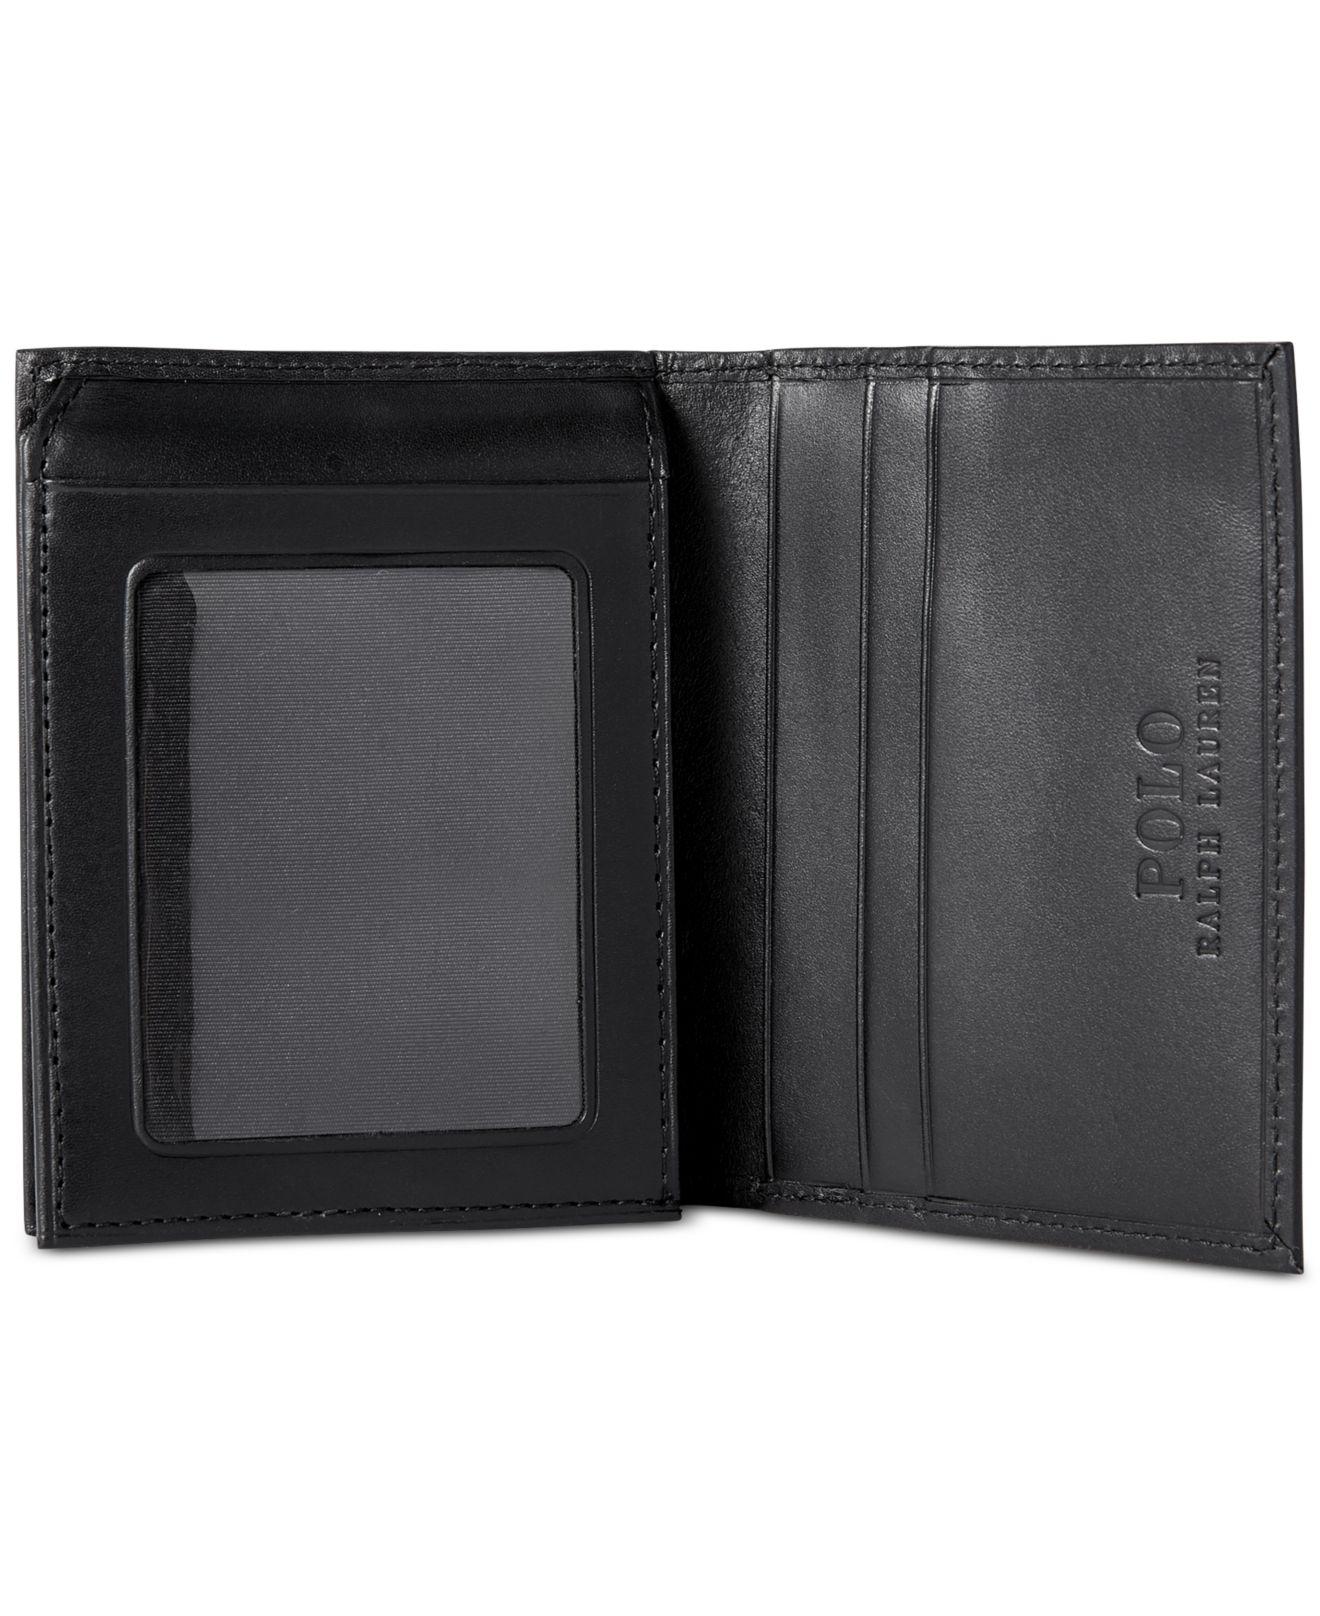 Polo Ralph Lauren Leather Wallet, Burnished Billfold Wallet With Window ...